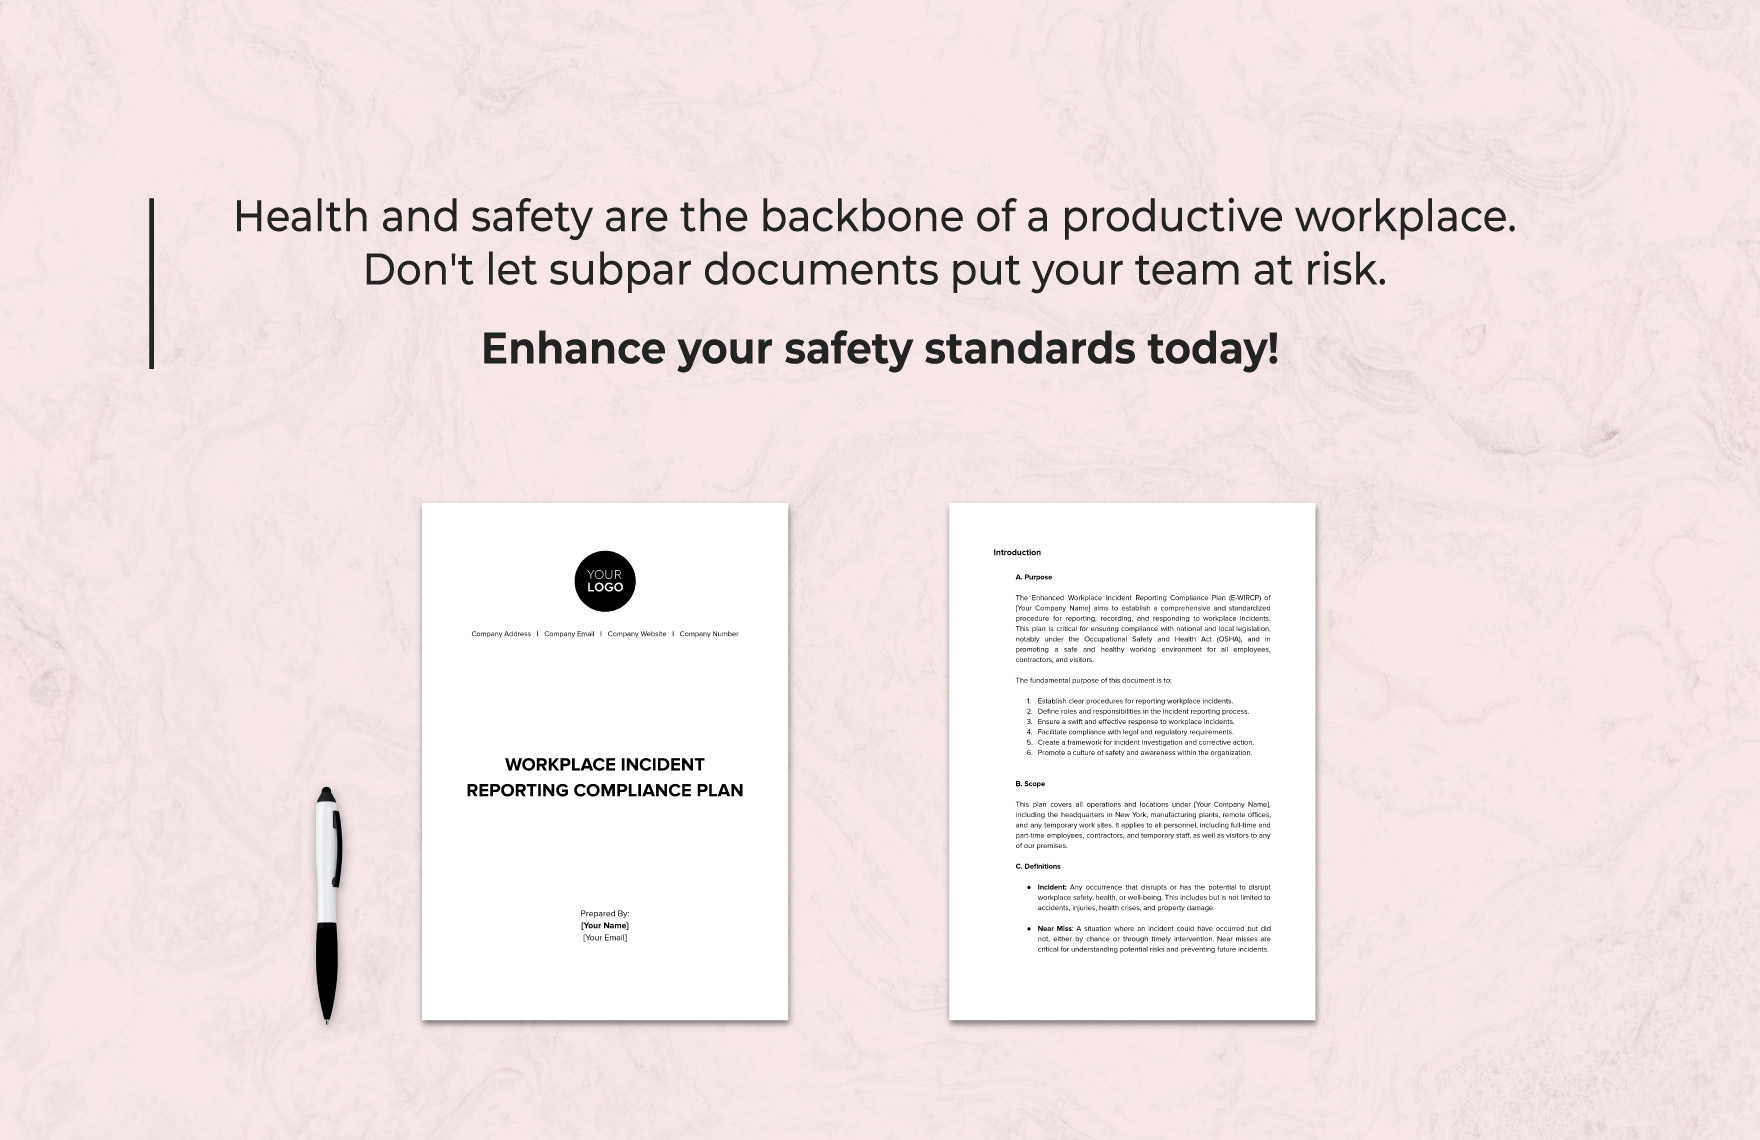 Workplace Incident Reporting Compliance Plan Template